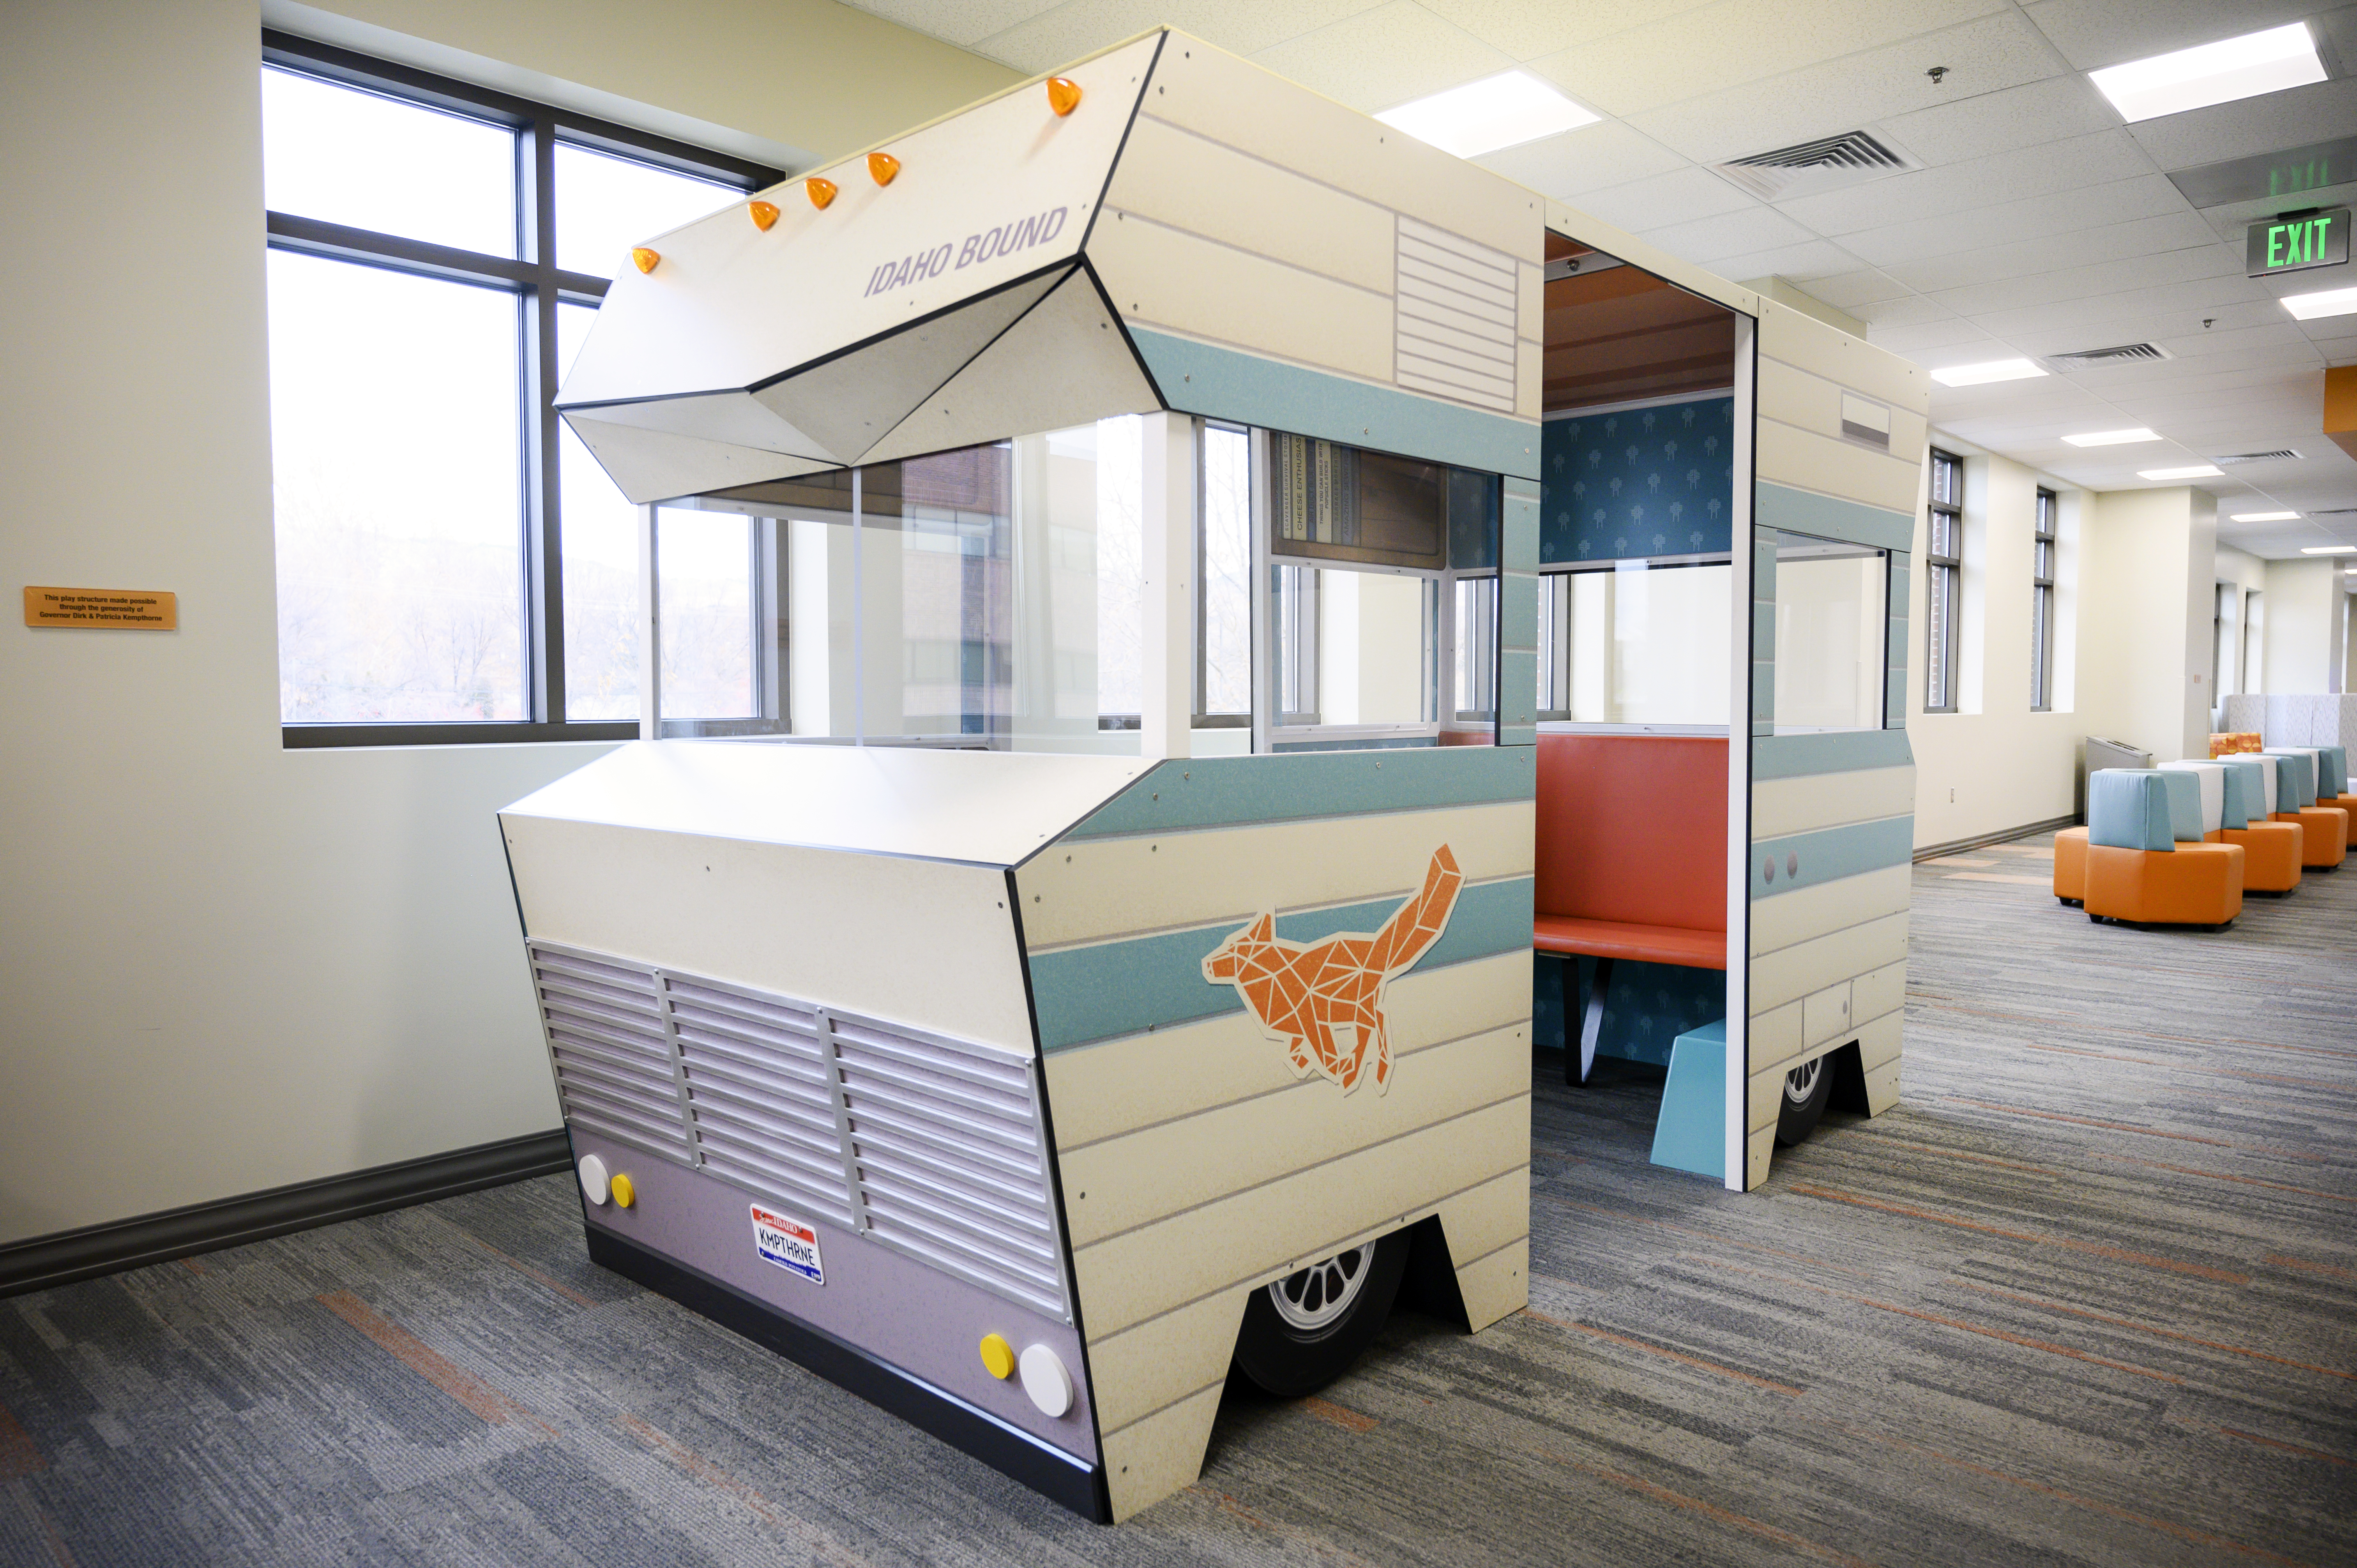 A seating area made to look like an RV, that says 